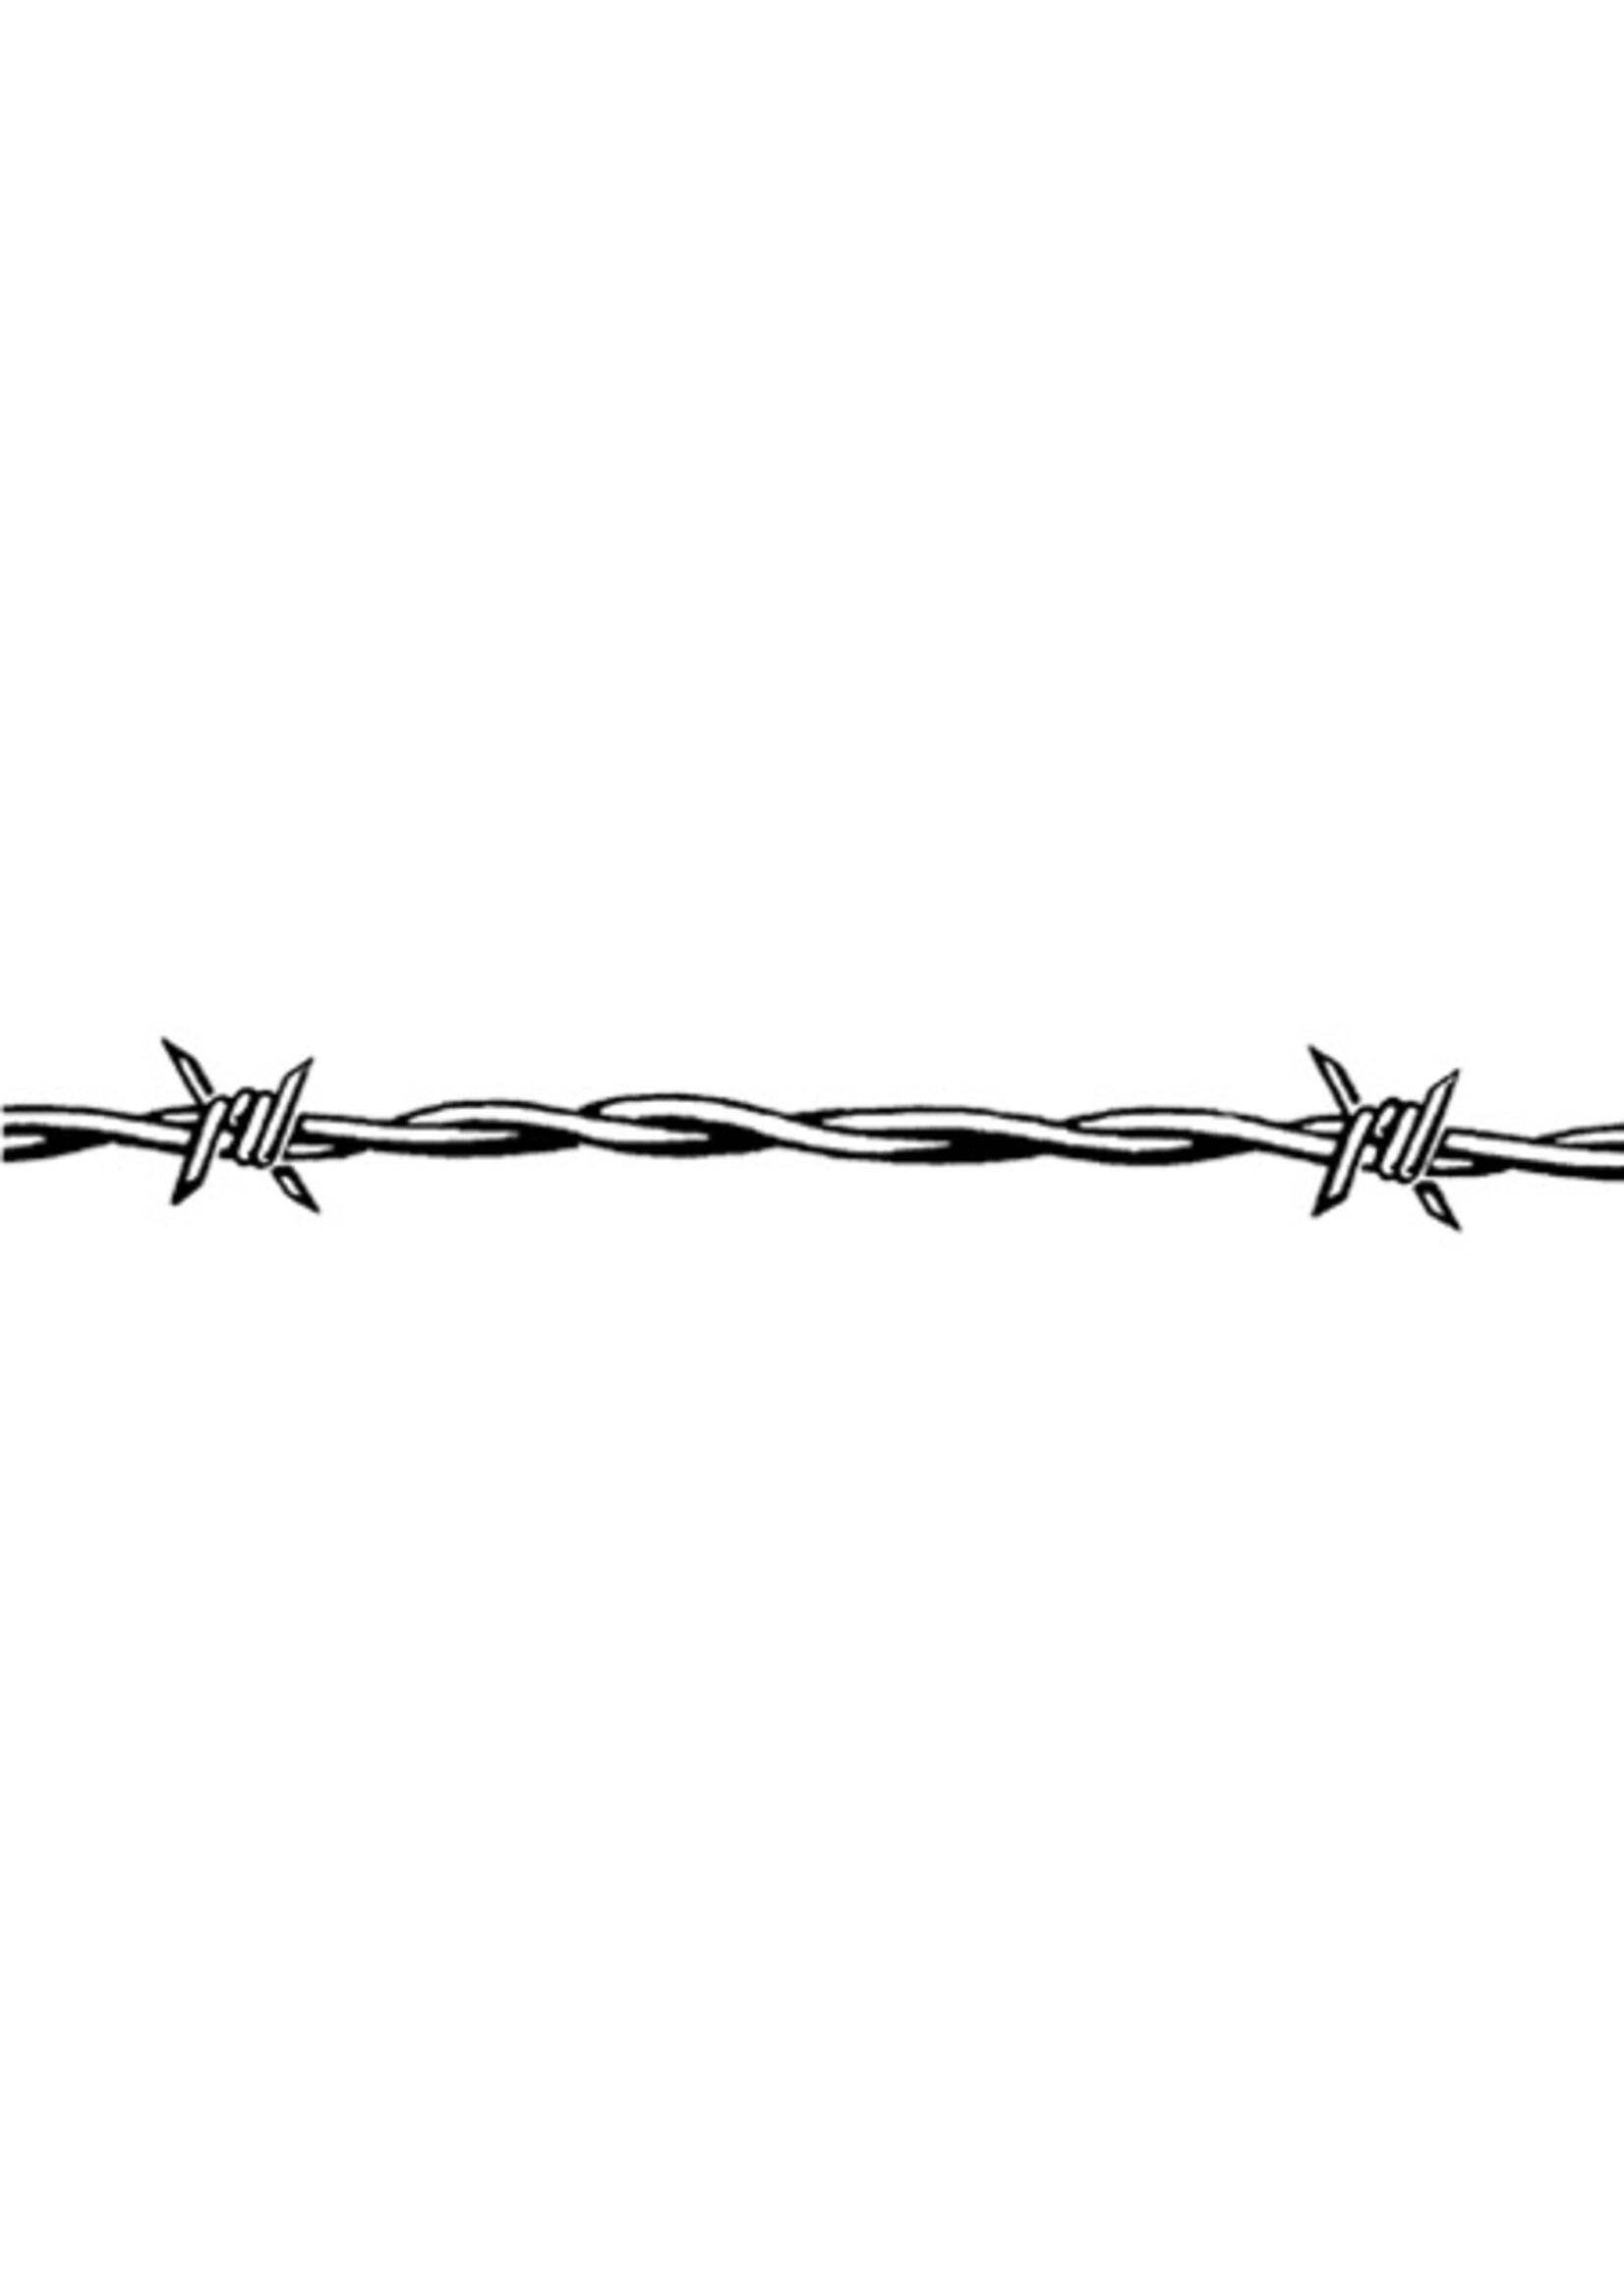 Barbed Wire - 12.5 GA.